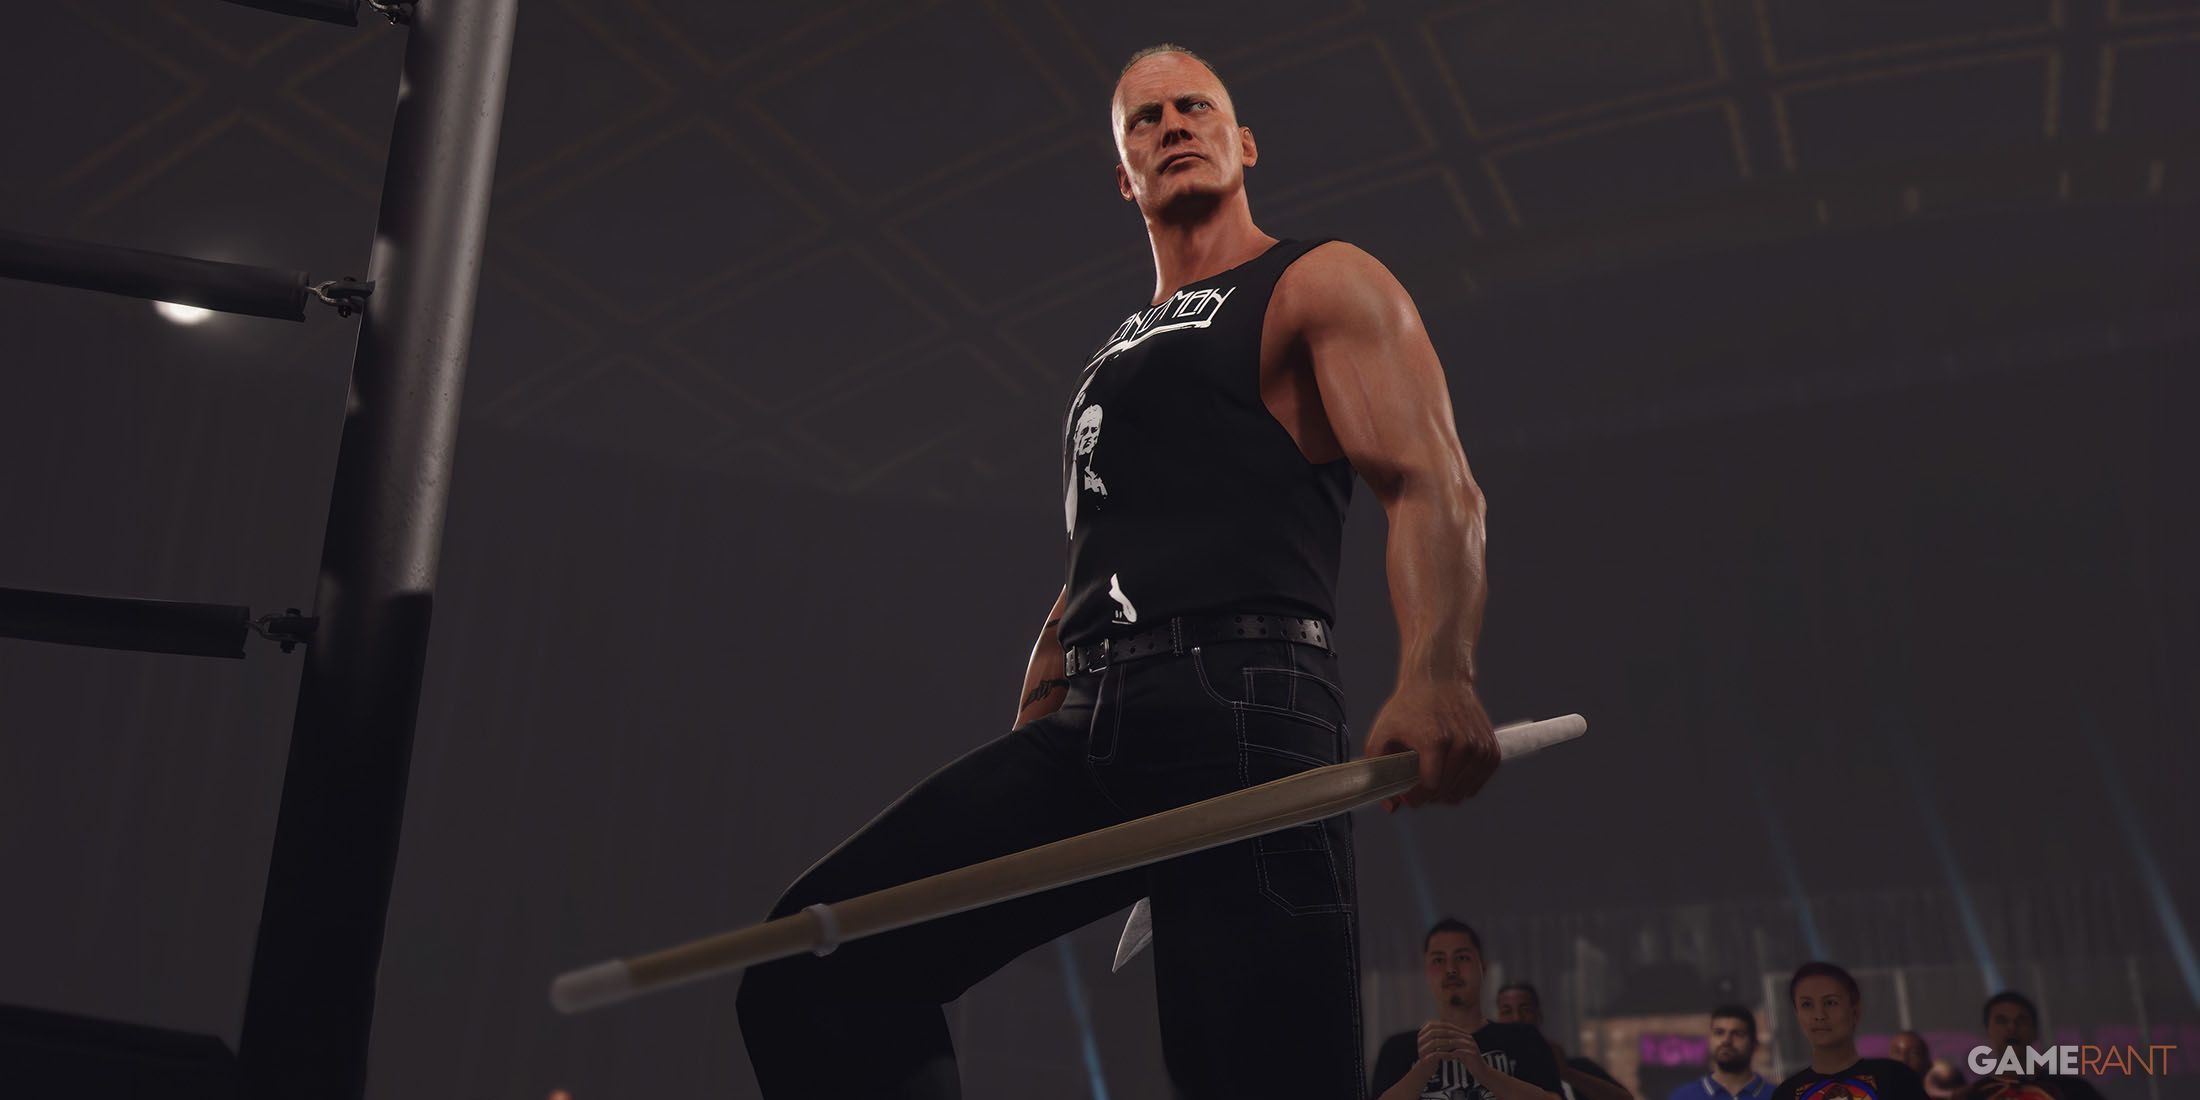 A screenshot of the Sandman entering the ring with a kendo stick in his hand in WWE 2K24.